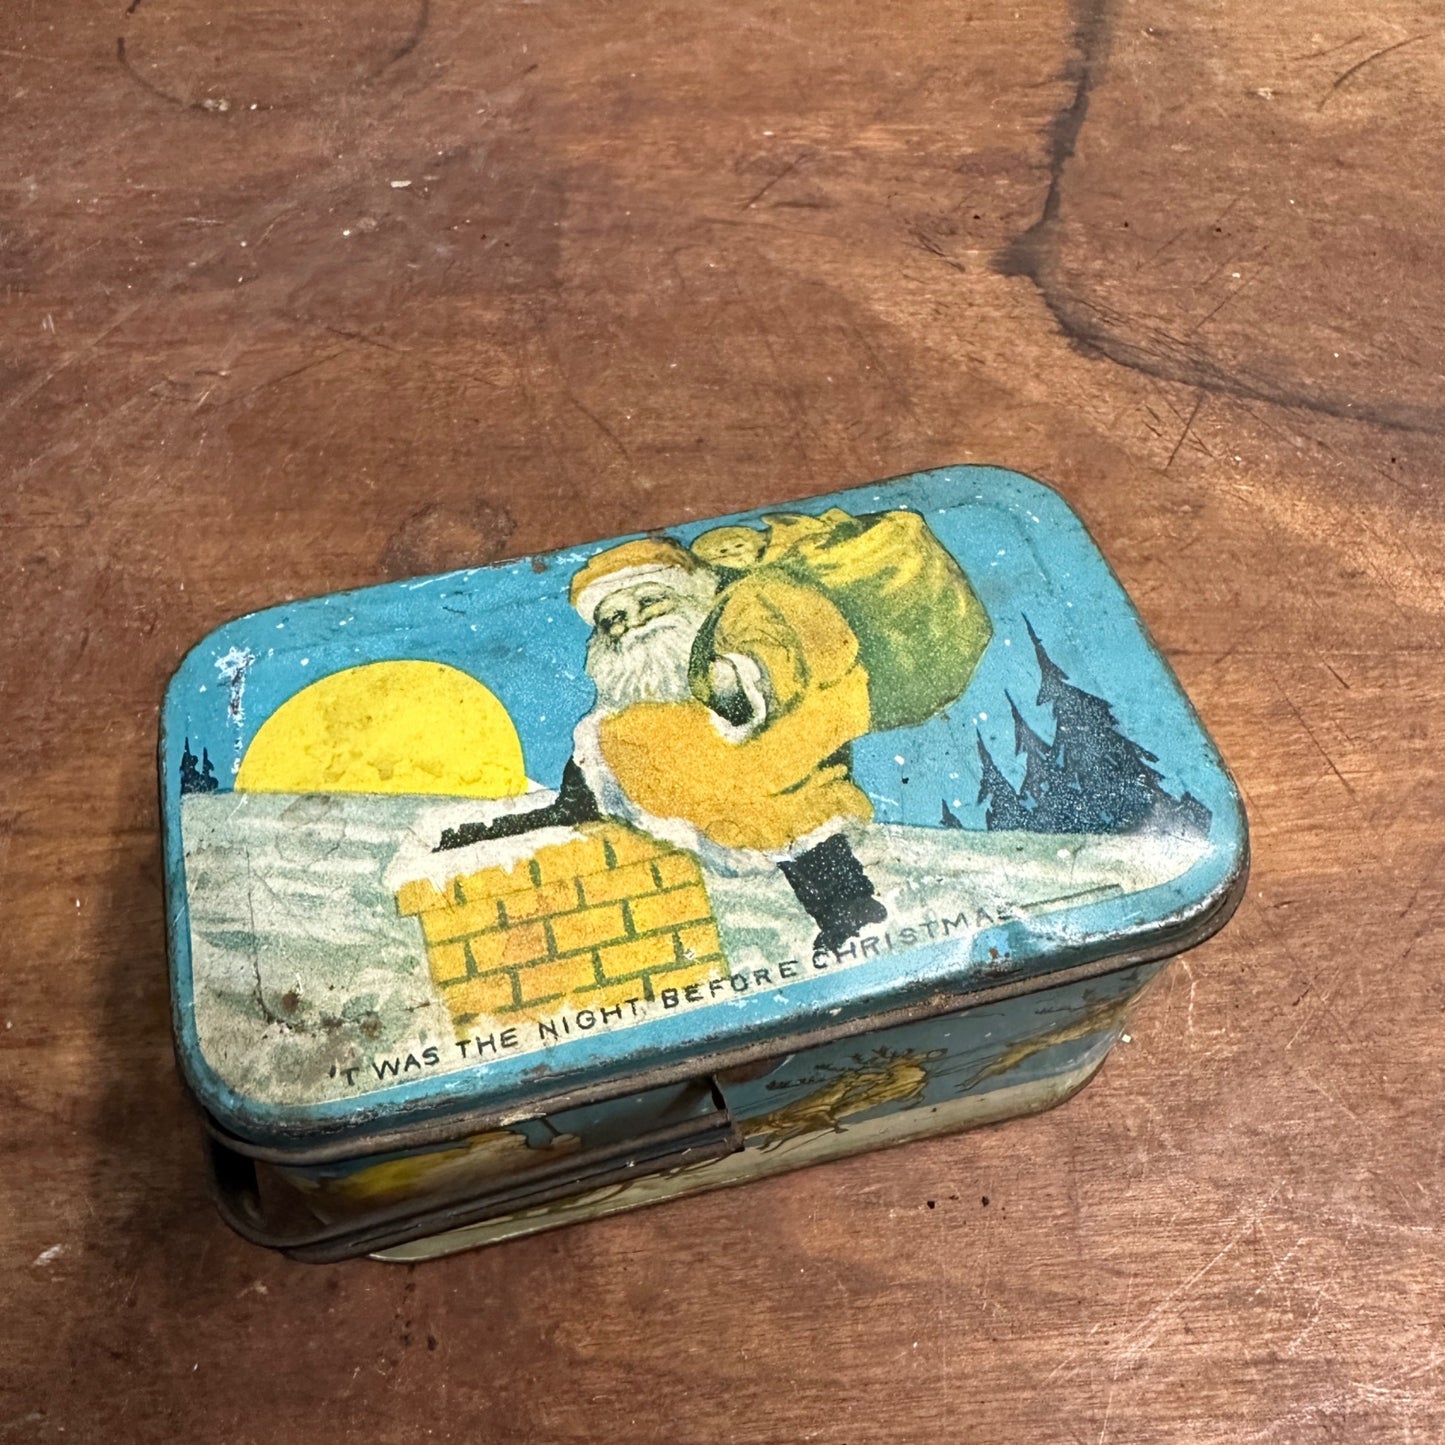 VINTAGE SANTA TWAS THE NIGHT BEFORE CHRISTMAS TINDECO CANDY TIN BOX LUNCHBOX